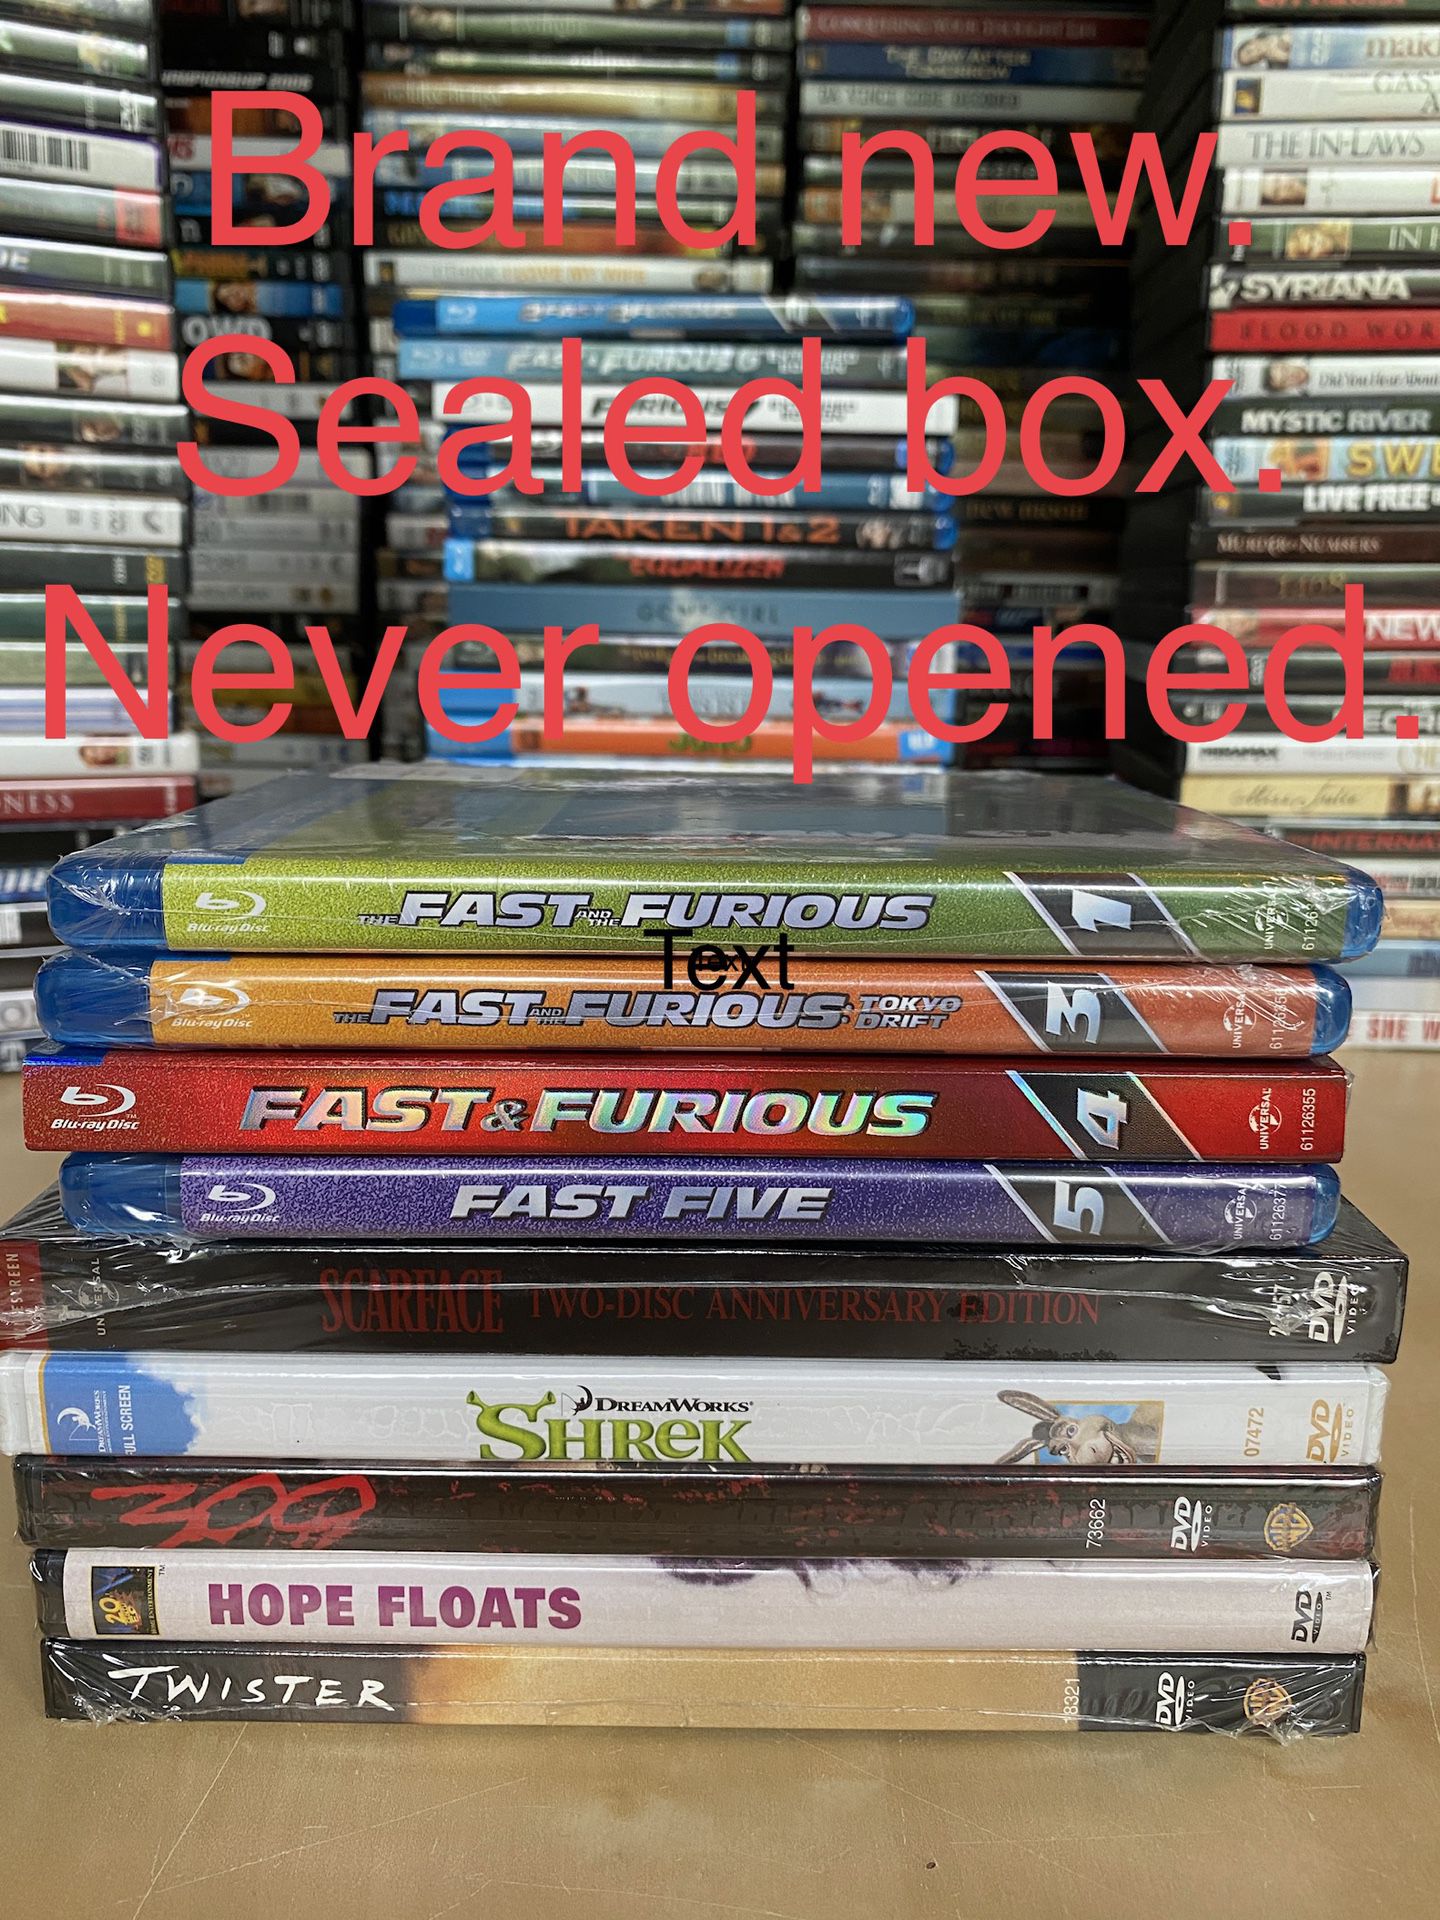 Movies on DVDs, Blu-ray, and audiobooks